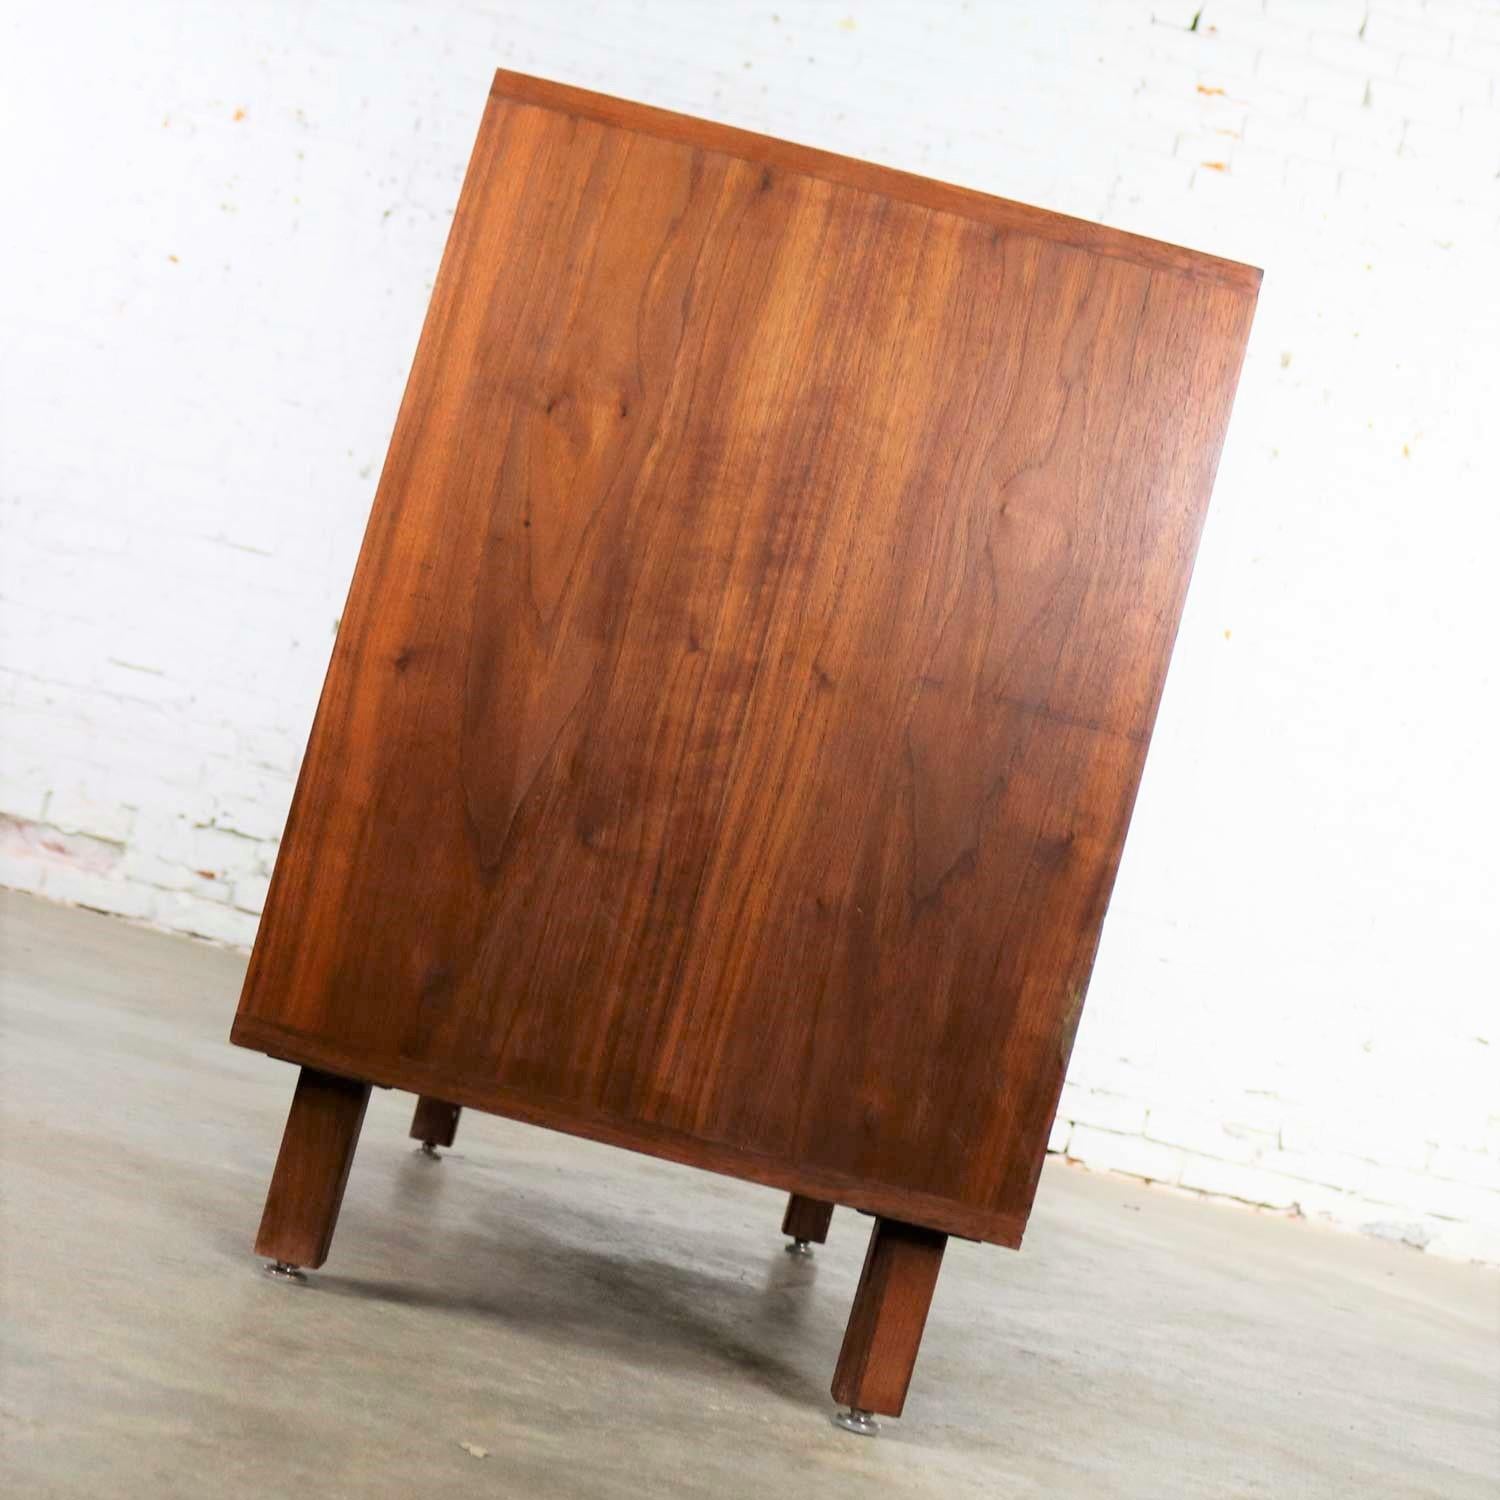 20th Century Mid-Century Modern Two-Drawer Lateral File Cabinet in Walnut by Hardwood House 